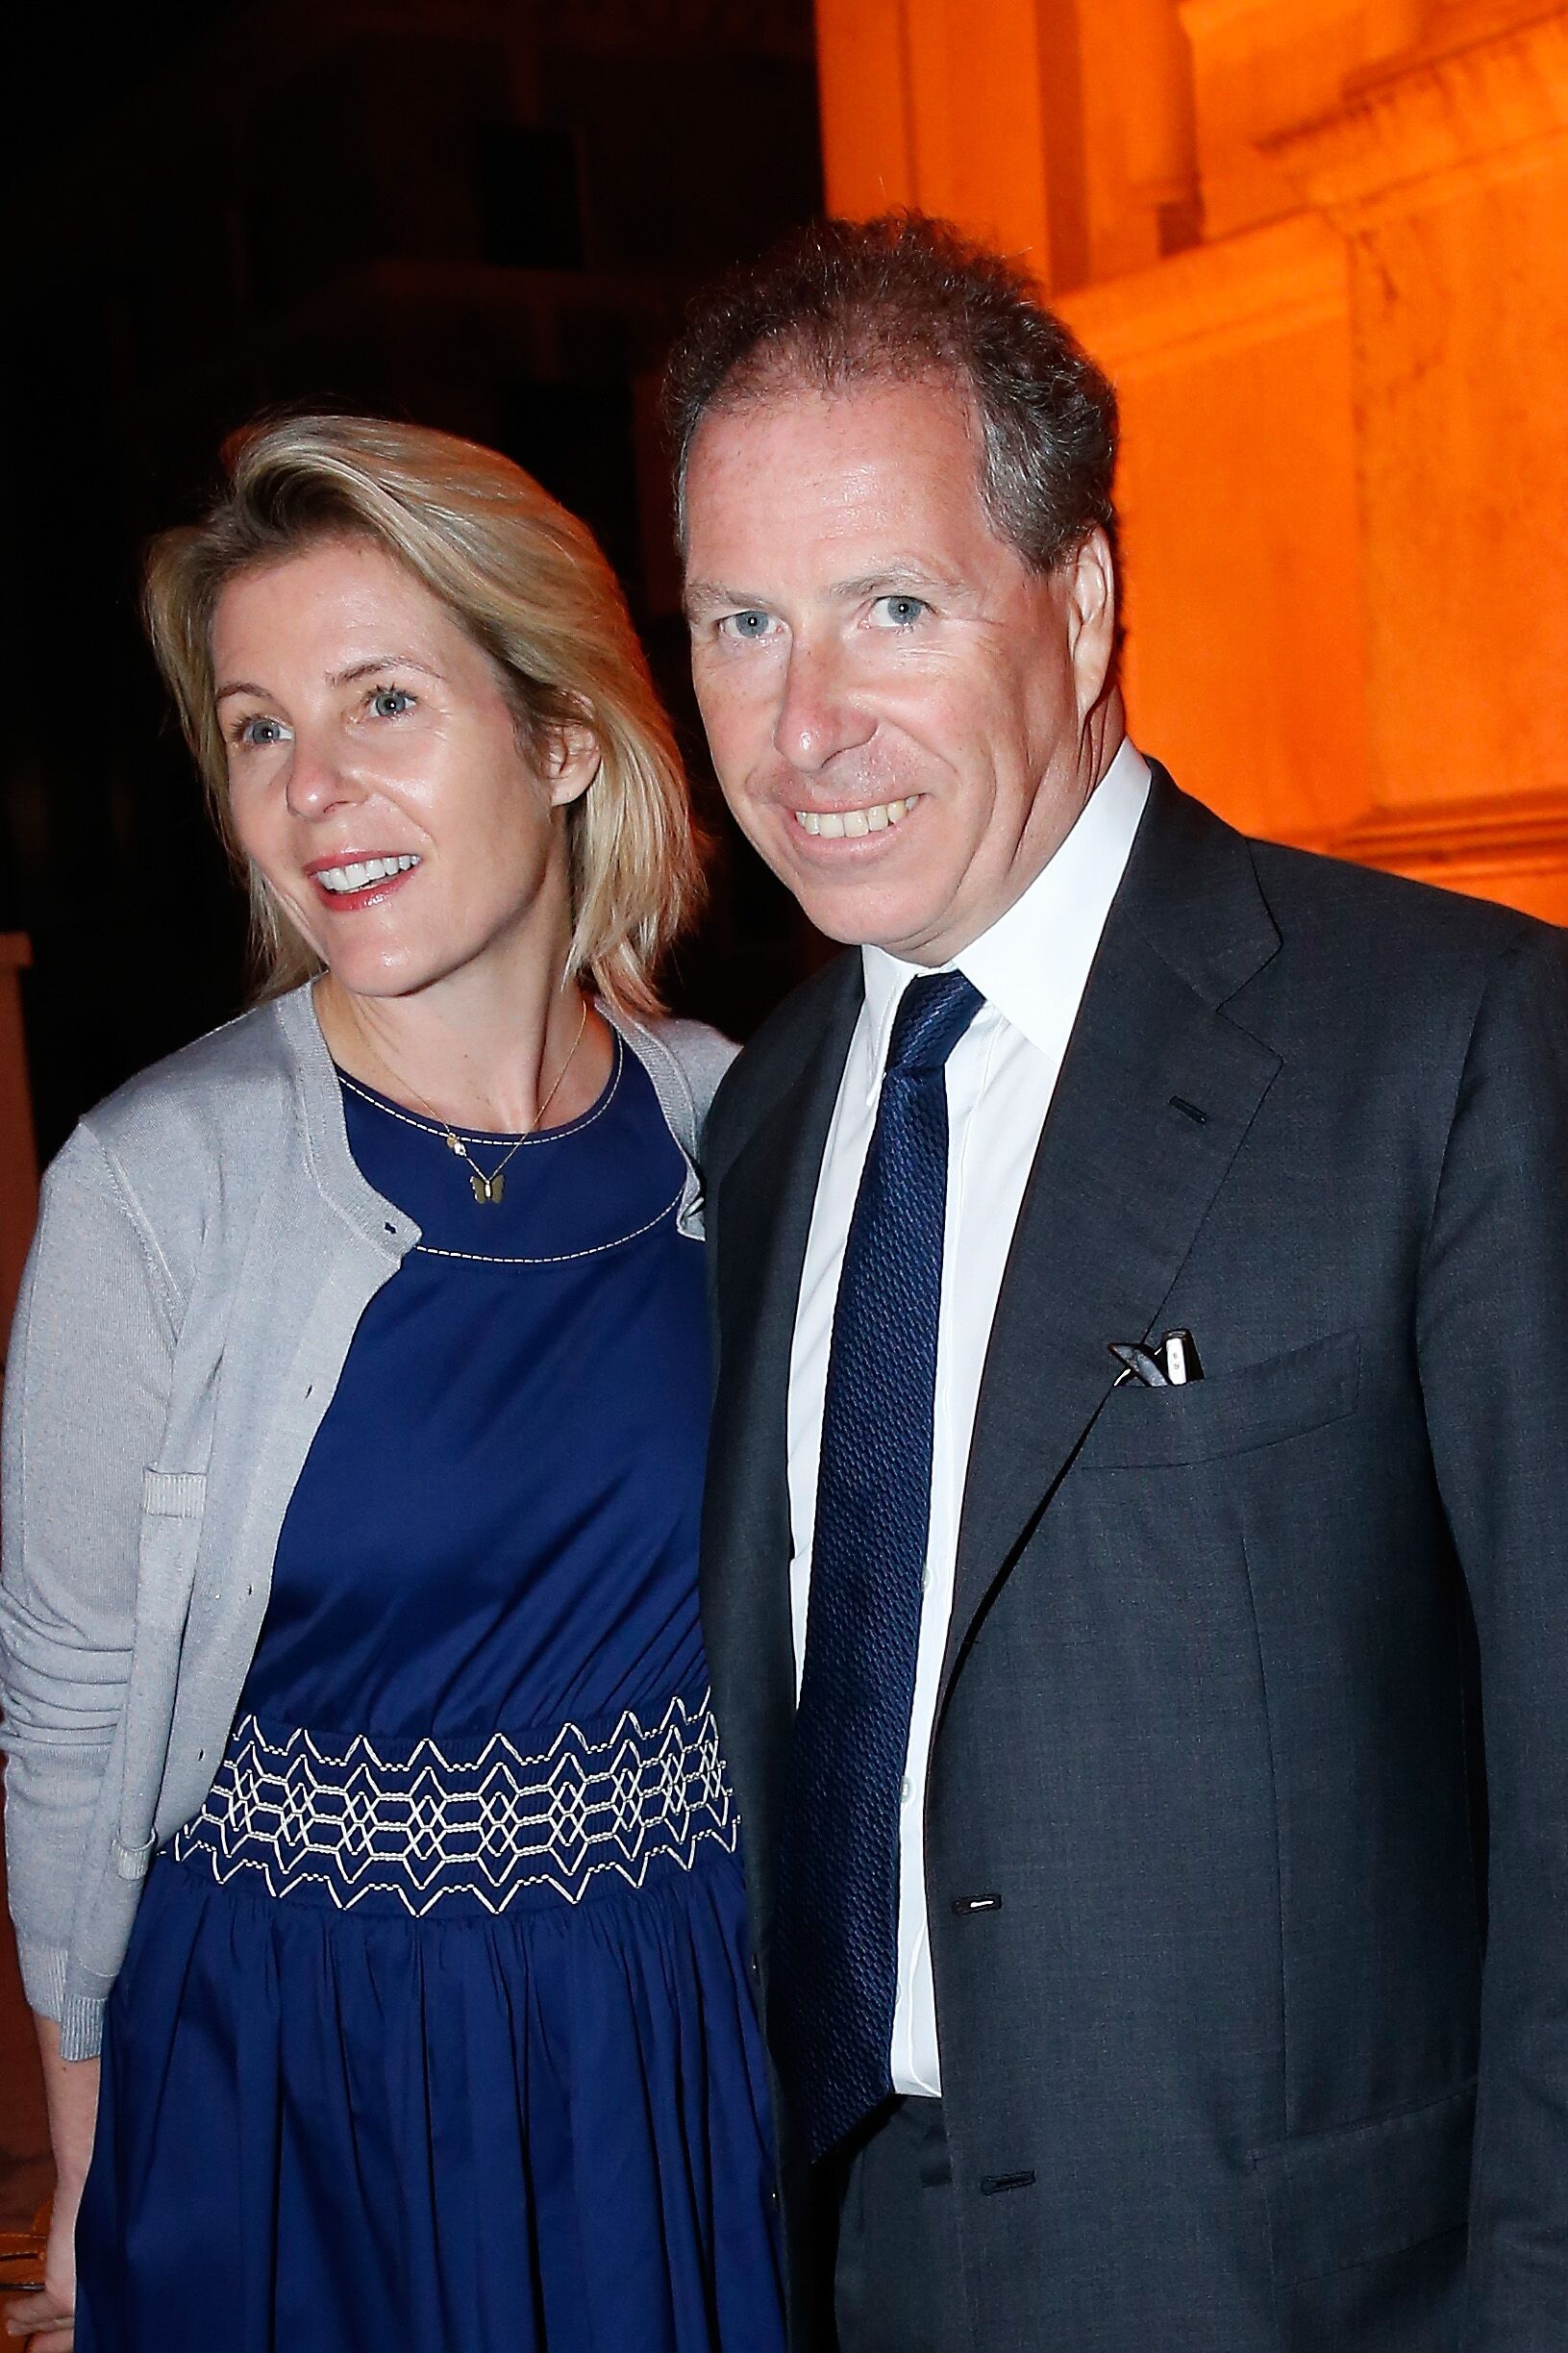  David Armstrong-Jones and wife attend the Dinner At 'Fondazione Cini, Isola Di San Giorgio', 2015 Venice Biennale on May 6, 2015 in Venice, Italy | Photo: Getty Images